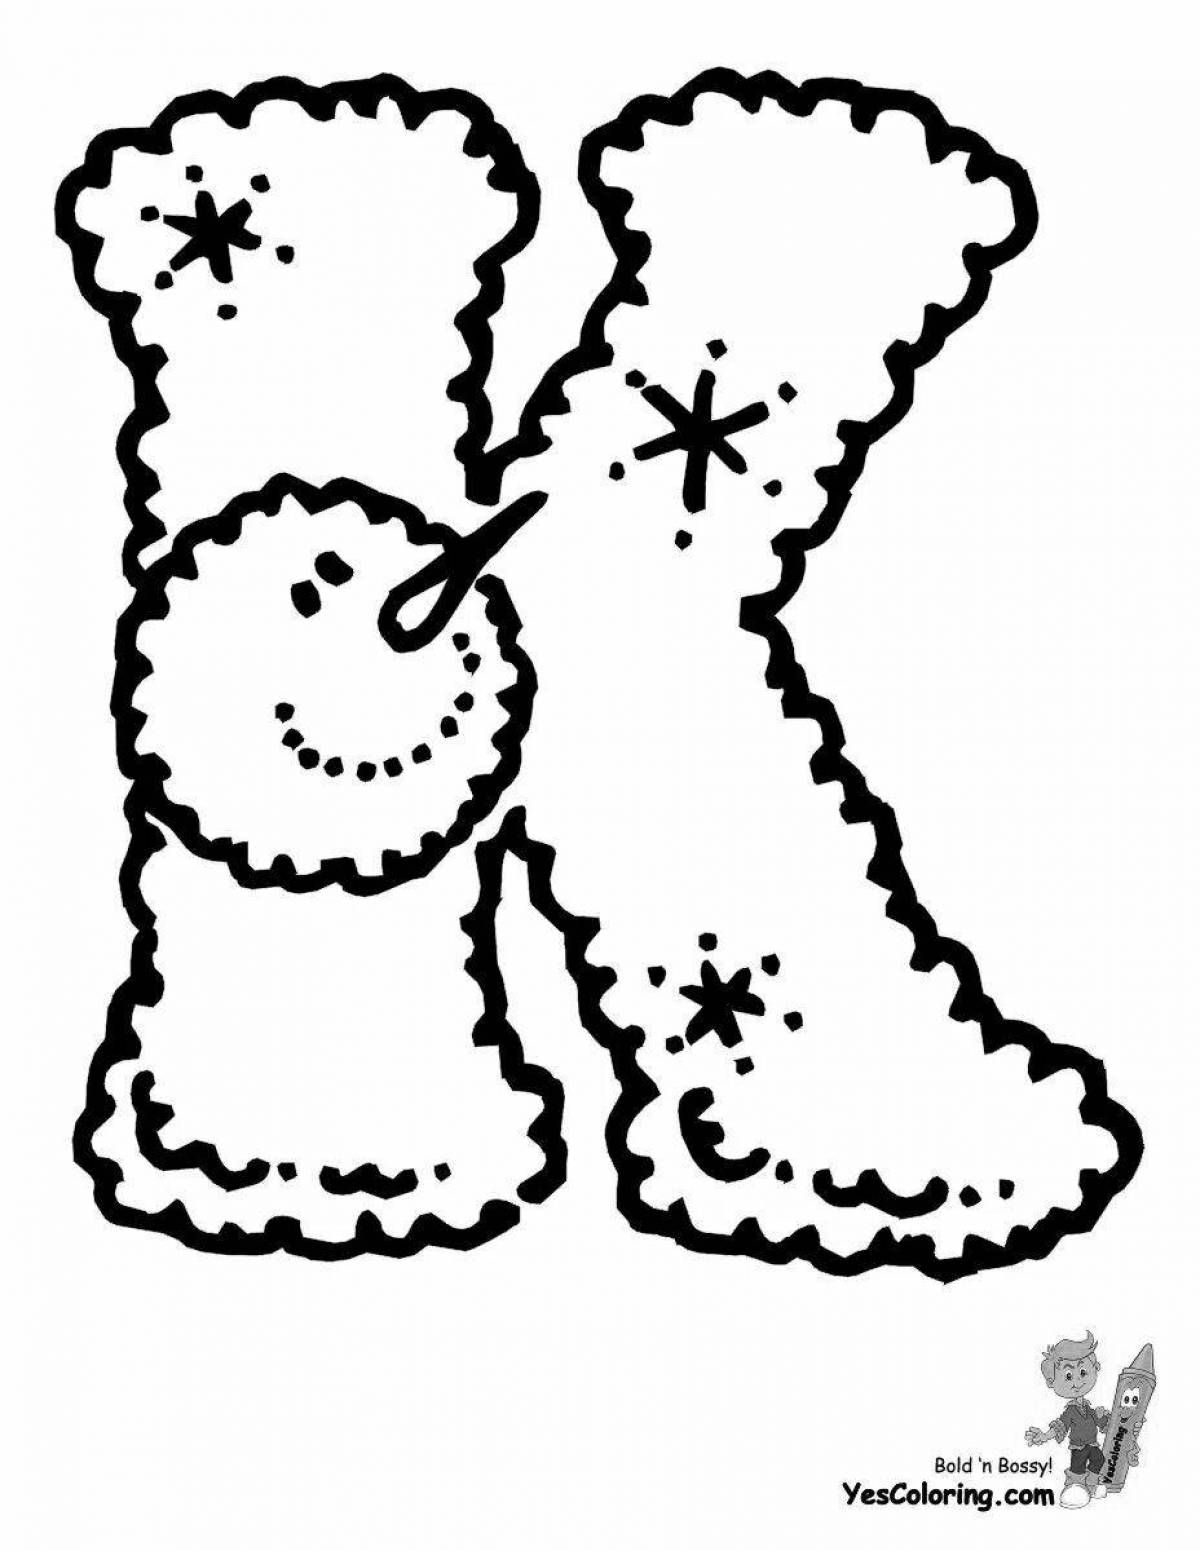 Coloring page glamorous new year letters